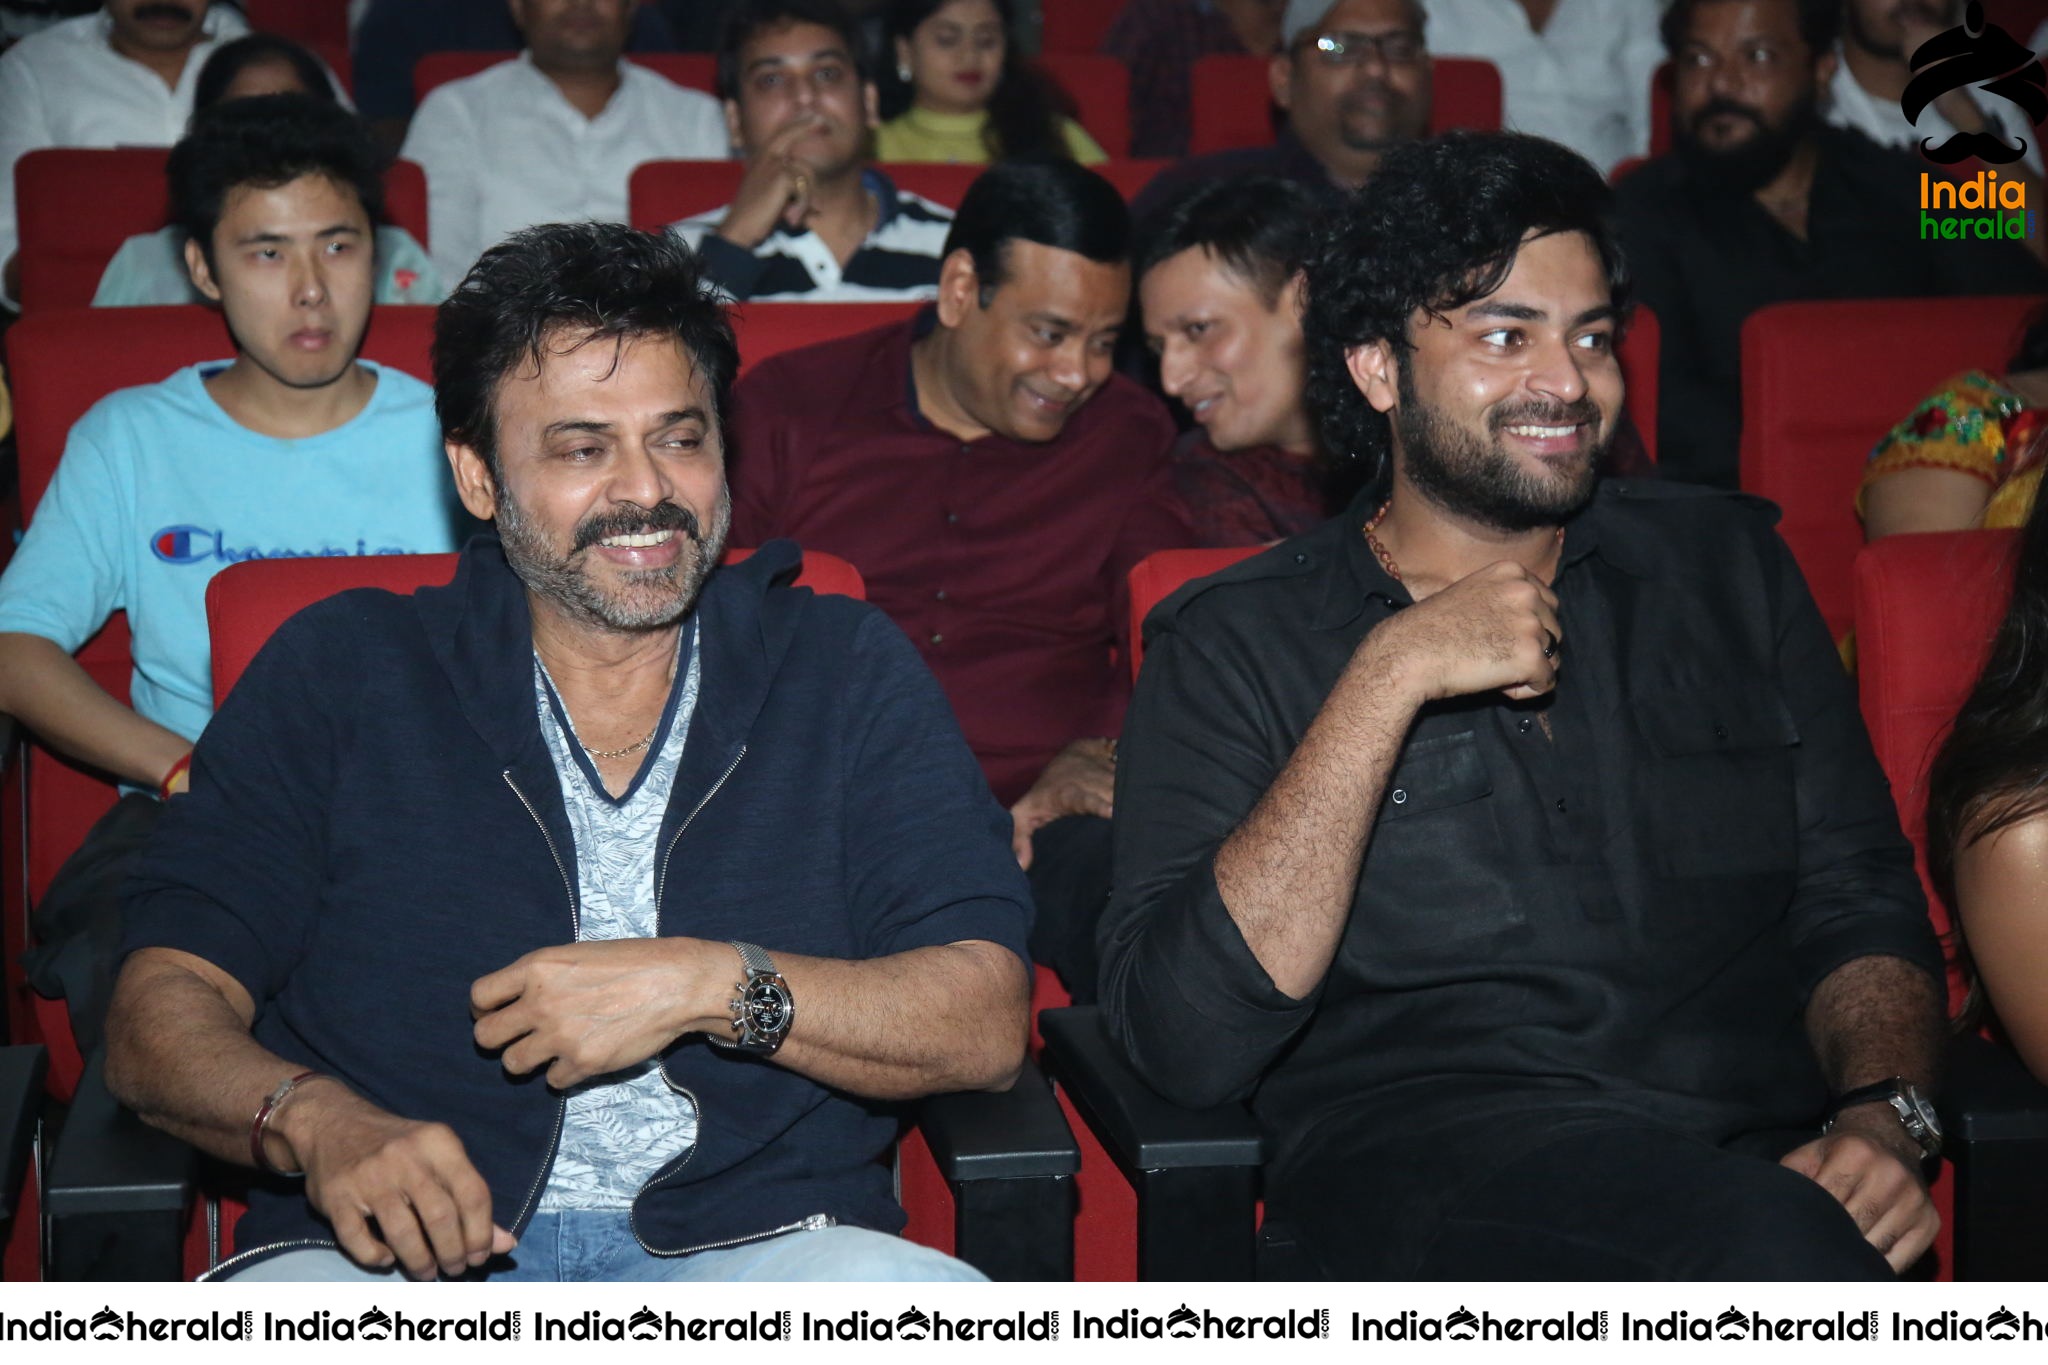 Victory Venkatesh And Varun Tej Spotted Chatting At the Event